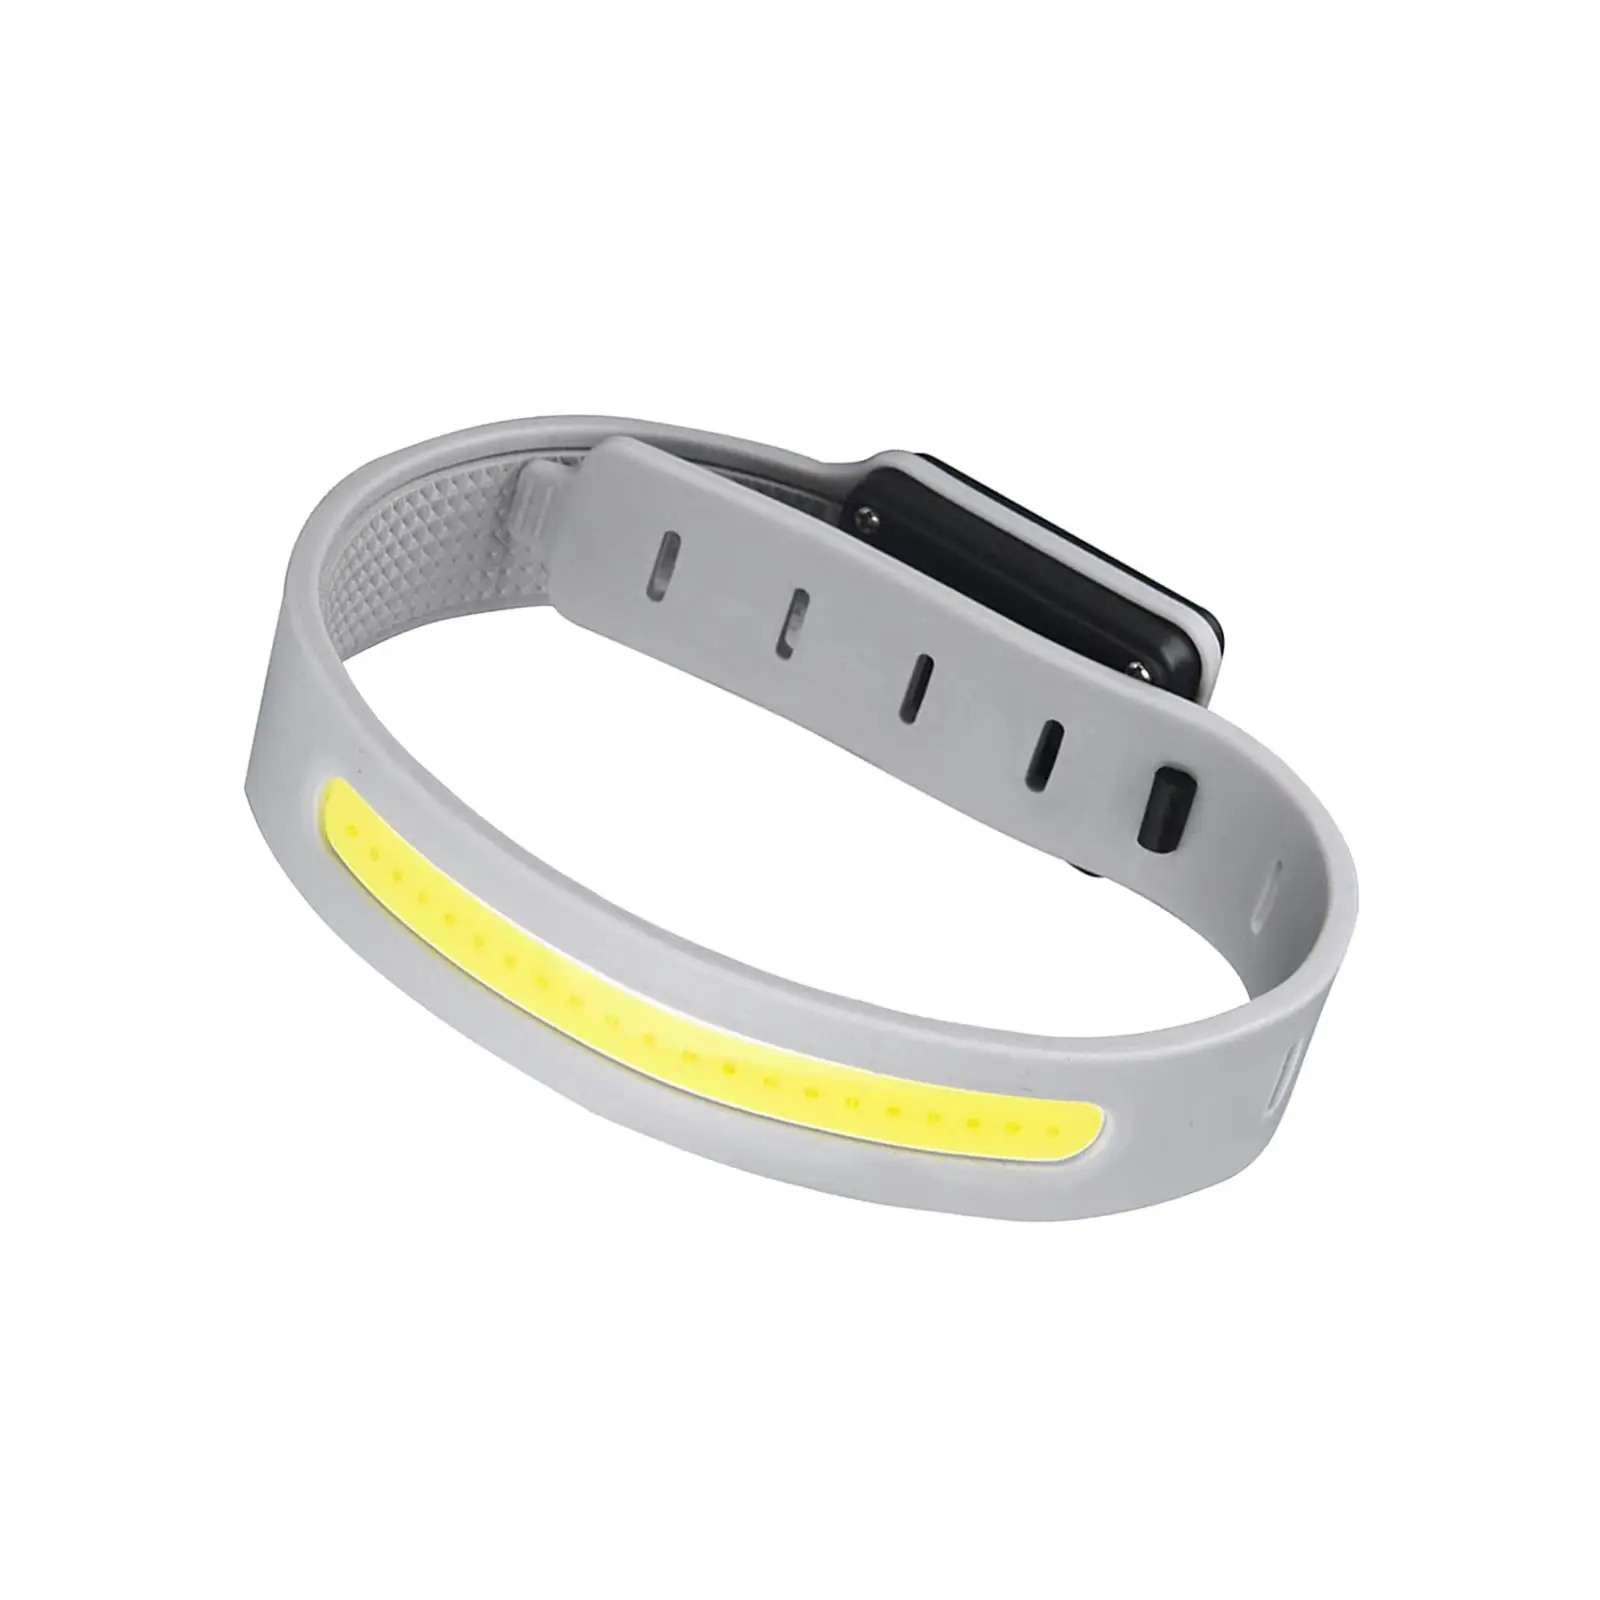 Light up Armband Rechargeable Strap Wearable Sports Wristband Safety Light for Runners for Cycling Night Running Walking Hiking